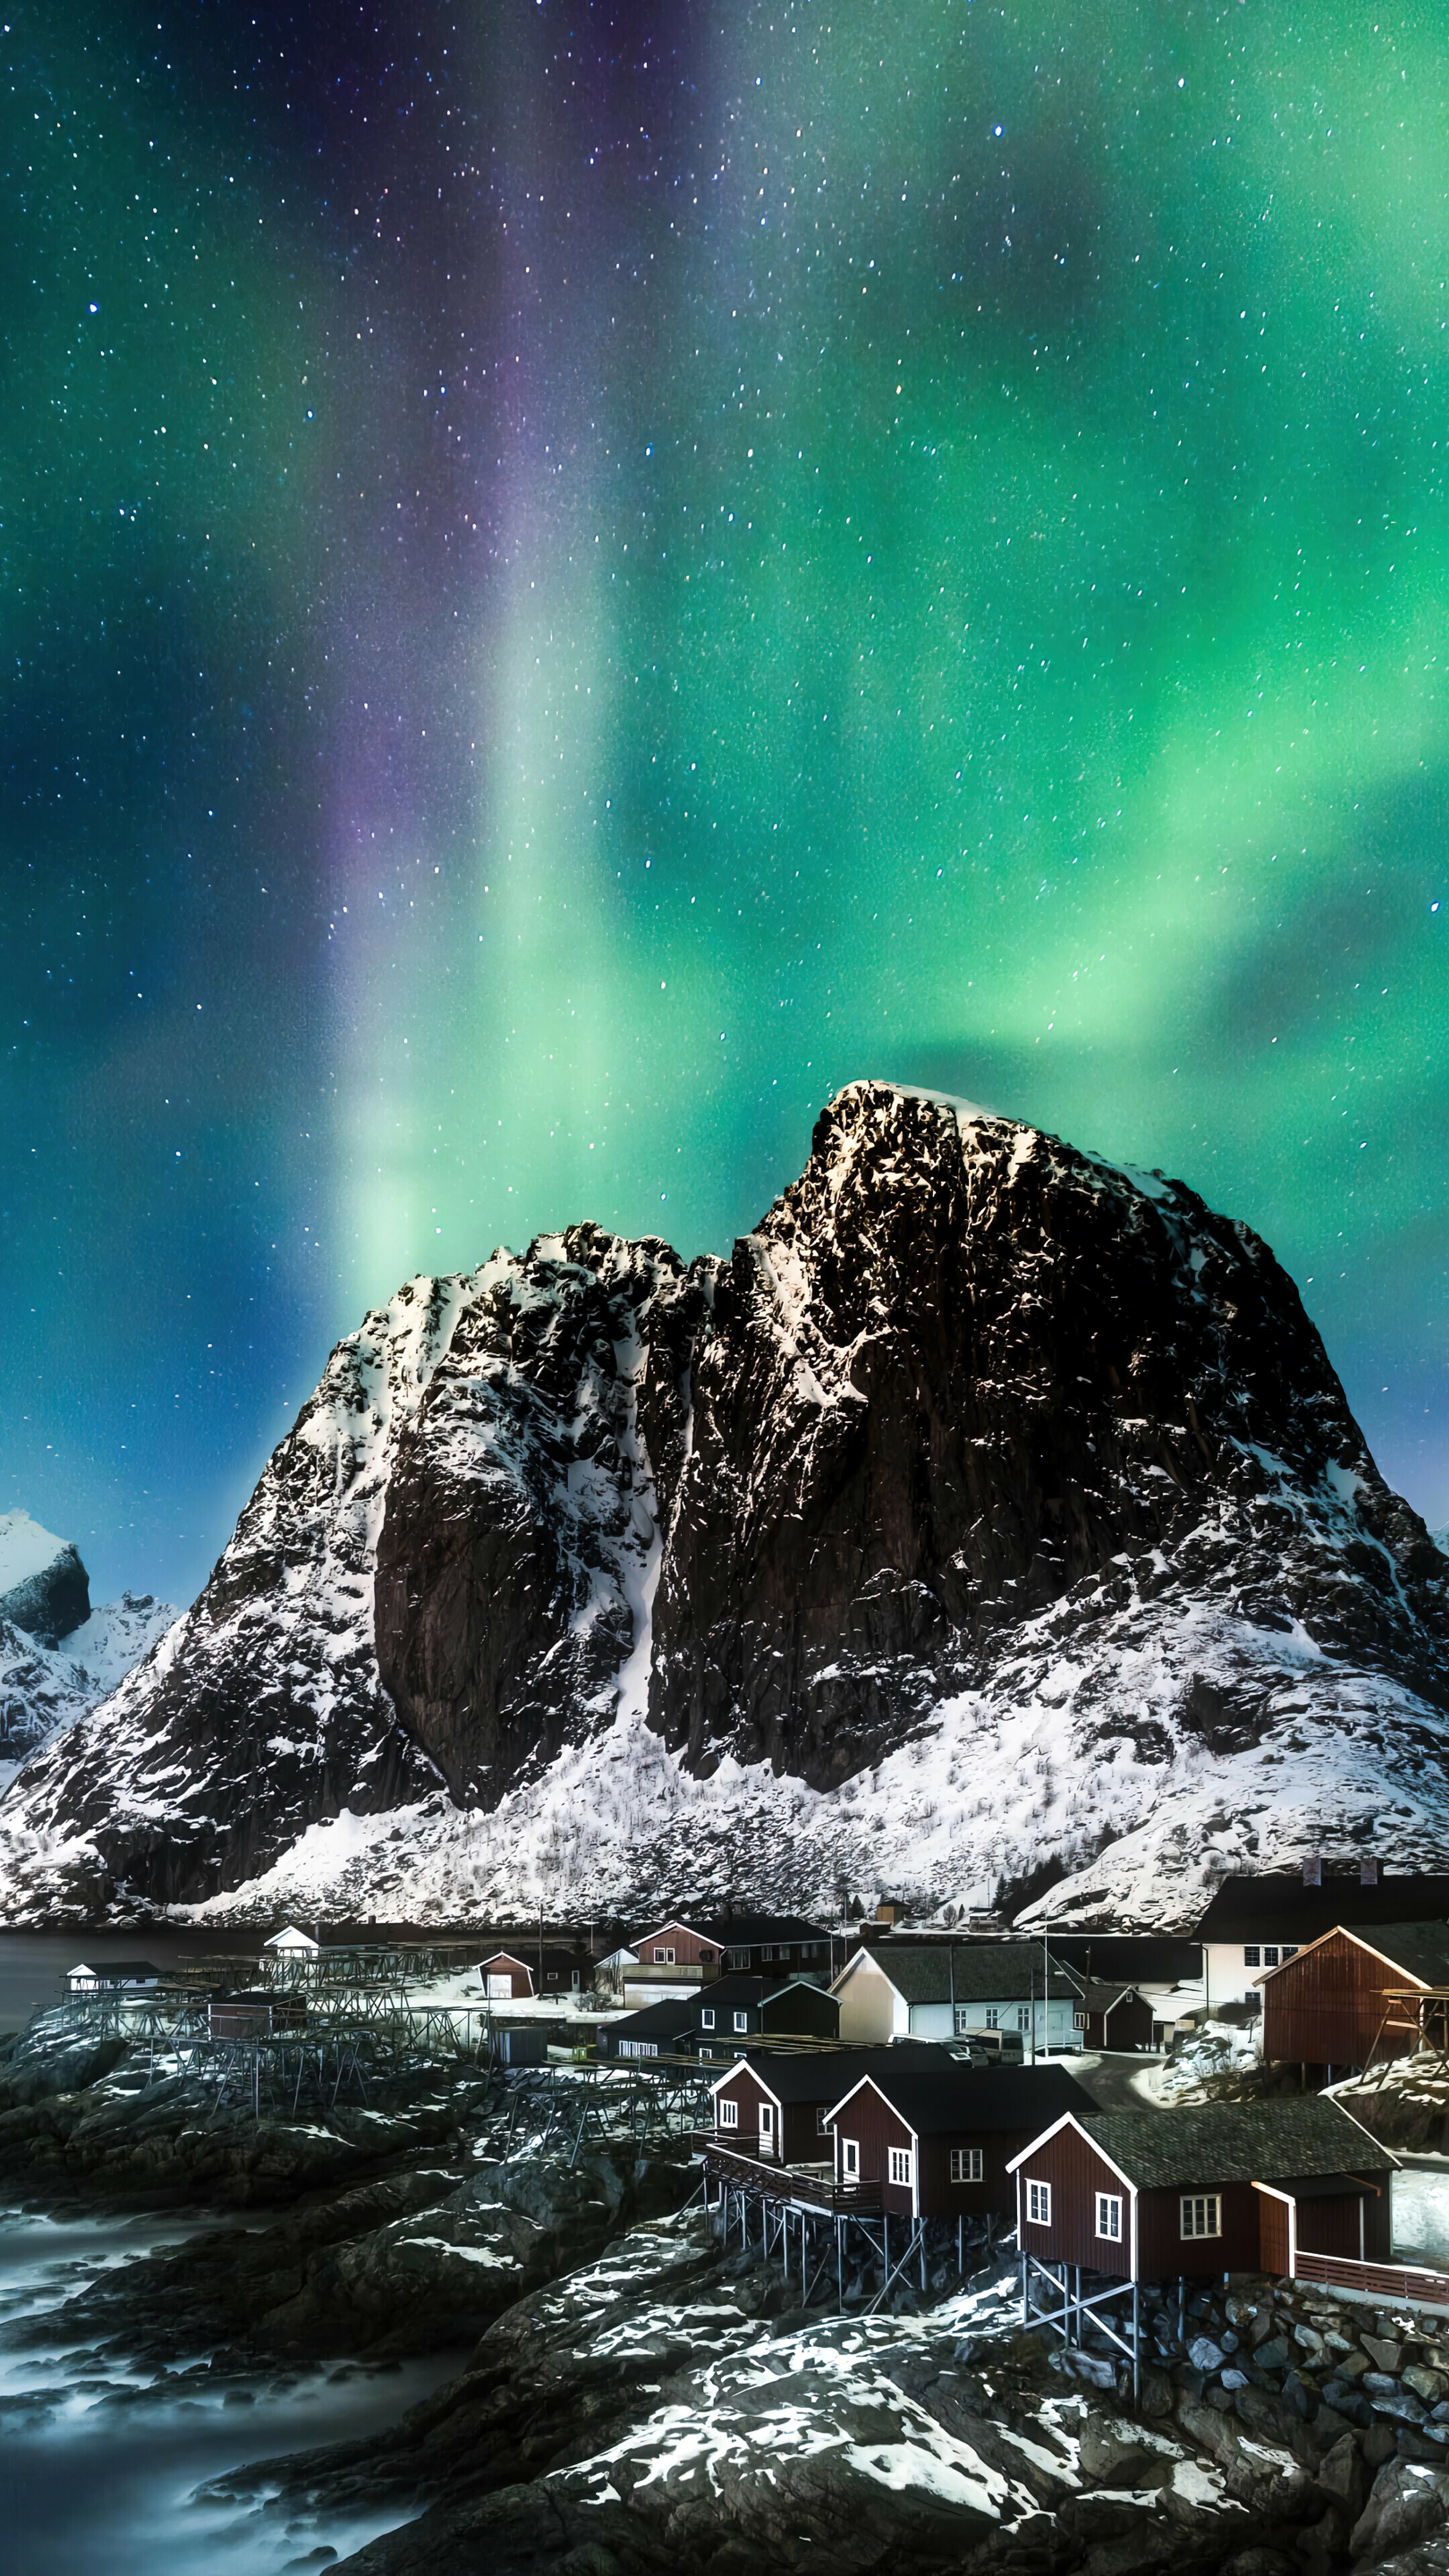 Aurora Borealis: A display of light commonly seen in the night sky in the northern countries, Norway, Mountain scenery. 2160x3840 4K Wallpaper.